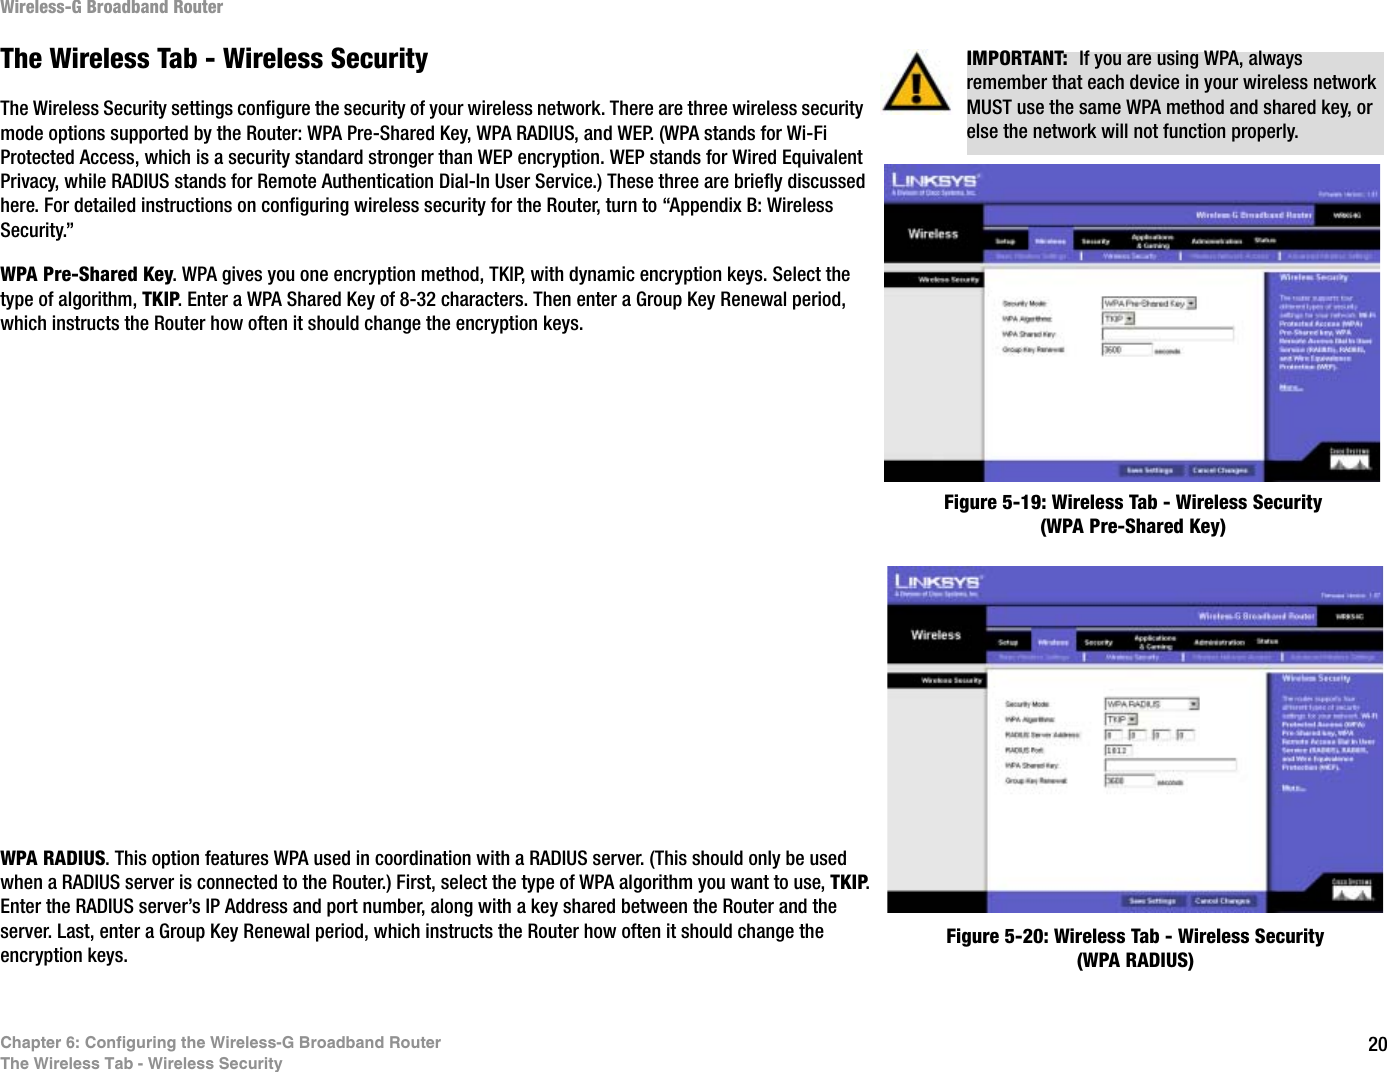 20Chapter 6: Configuring the Wireless-G Broadband RouterThe Wireless Tab - Wireless SecurityWireless-G Broadband RouterThe Wireless Tab - Wireless SecurityThe Wireless Security settings configure the security of your wireless network. There are three wireless security mode options supported by the Router: WPA Pre-Shared Key, WPA RADIUS, and WEP. (WPA stands for Wi-Fi Protected Access, which is a security standard stronger than WEP encryption. WEP stands for Wired Equivalent Privacy, while RADIUS stands for Remote Authentication Dial-In User Service.) These three are briefly discussed here. For detailed instructions on configuring wireless security for the Router, turn to “Appendix B: Wireless Security.”WPA Pre-Shared Key. WPA gives you one encryption method, TKIP, with dynamic encryption keys. Select the type of algorithm, TKIP. Enter a WPA Shared Key of 8-32 characters. Then enter a Group Key Renewal period, which instructs the Router how often it should change the encryption keys.WPA RADIUS. This option features WPA used in coordination with a RADIUS server. (This should only be used when a RADIUS server is connected to the Router.) First, select the type of WPA algorithm you want to use, TKIP.Enter the RADIUS server’s IP Address and port number, along with a key shared between the Router and the server. Last, enter a Group Key Renewal period, which instructs the Router how often it should change the encryption keys.Figure 5-19: Wireless Tab - Wireless Security (WPA Pre-Shared Key)Figure 5-20: Wireless Tab - Wireless Security (WPA RADIUS)IMPORTANT:  If you are using WPA, always remember that each device in your wireless network MUST use the same WPA method and shared key, or else the network will not function properly.